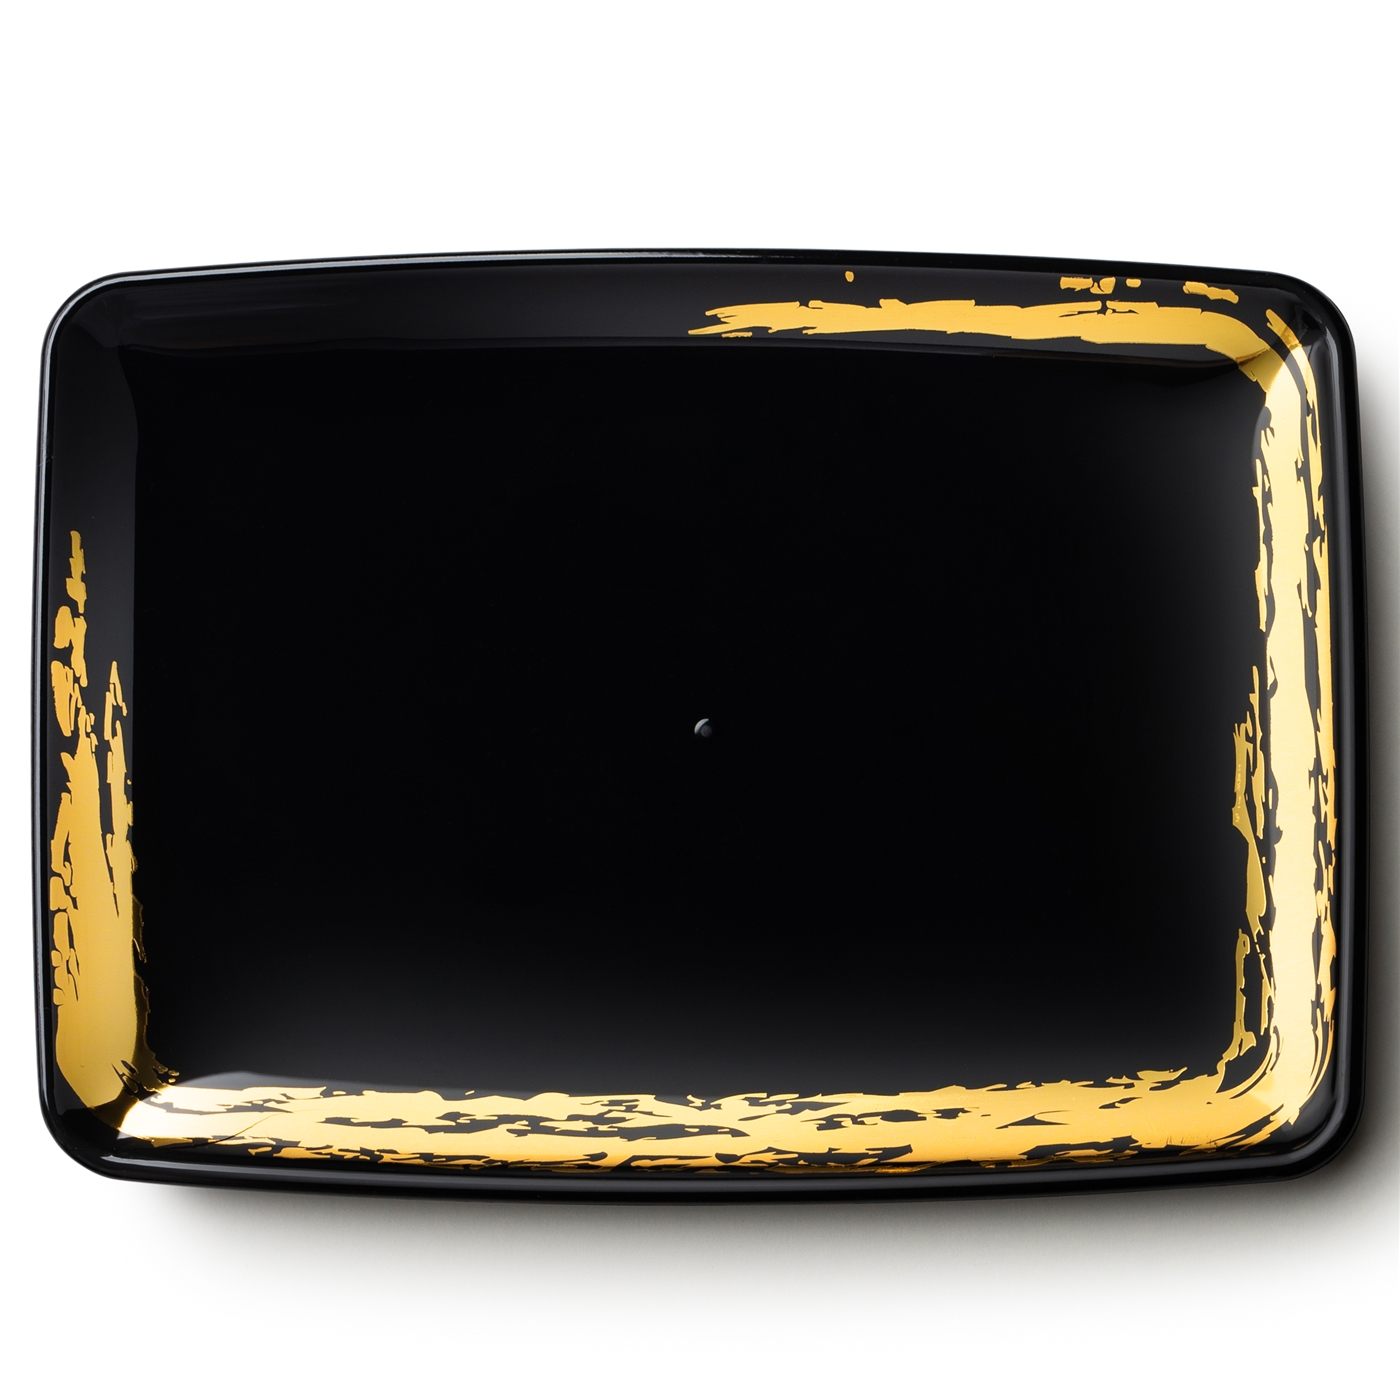 Decor Whisk Collection Black & Gold Small Rectangular Serving Tray